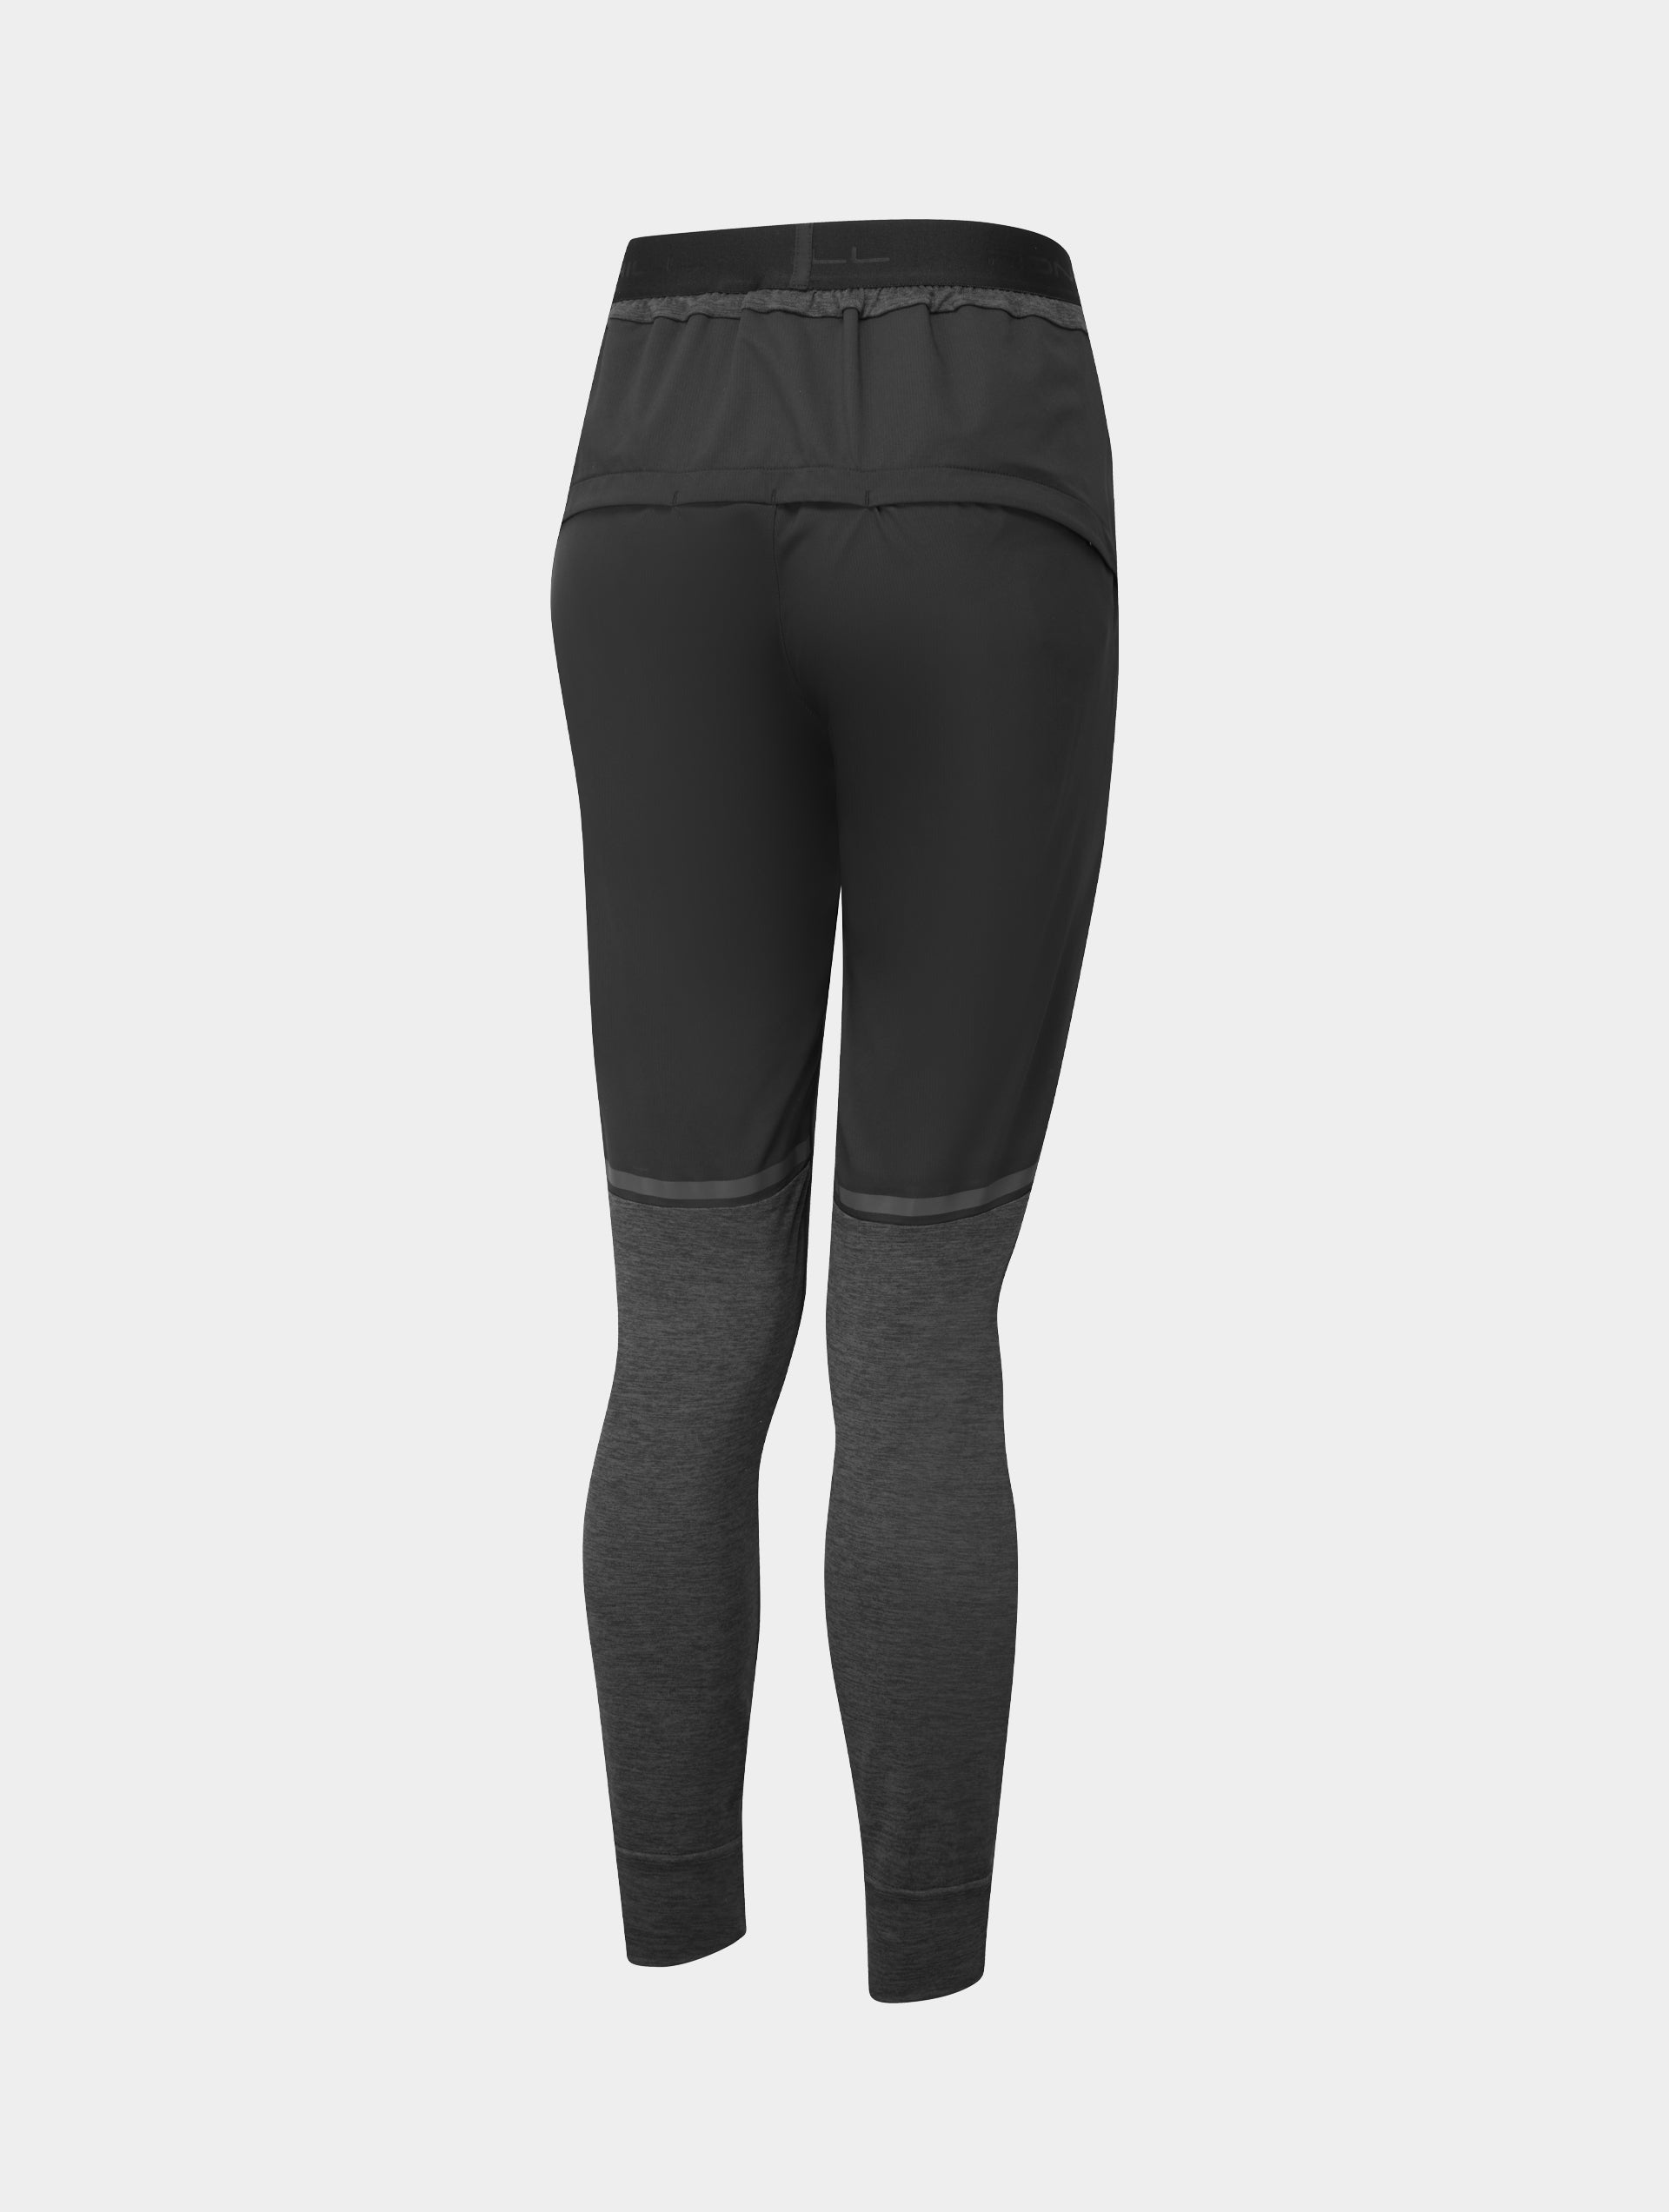 Ronhill Tech Winter Womens Thermal Running Tights All Black